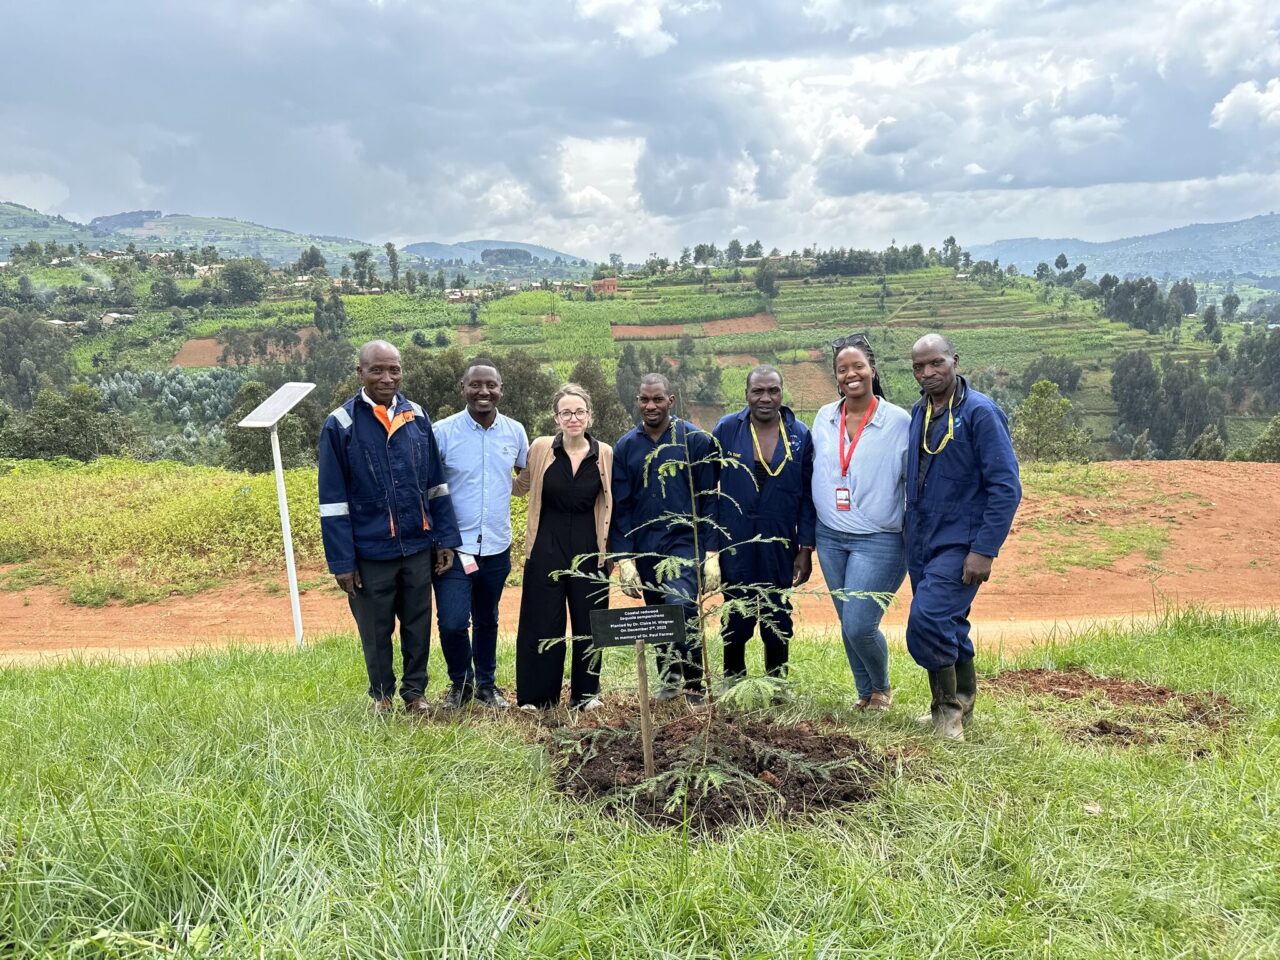 Claire M. Wagner: My thanks to Emmanuel Kamanzi and team for the opportunity to plant a redwood in Paul’s honor, and for keeping his legacy alive